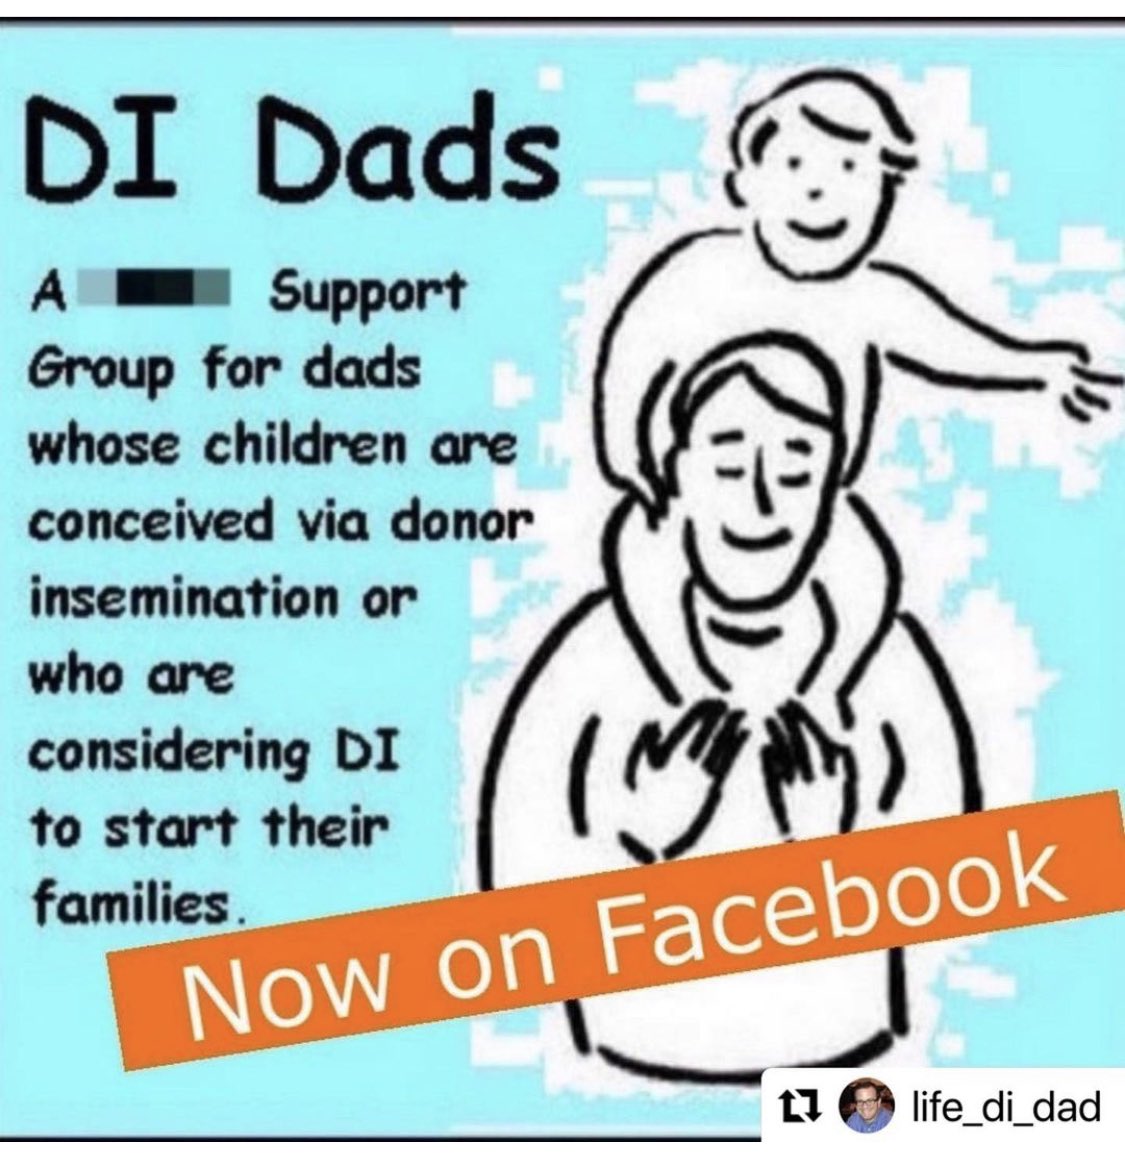 Men looking for a supportive men’s only community dealing with #malefactorinfertility and the decision regarding #donorsperm #donorinsemination - join us on the Facebook group DI Dads.  Private.  Discreet.  Your friends won’t see you as a member.  Really.